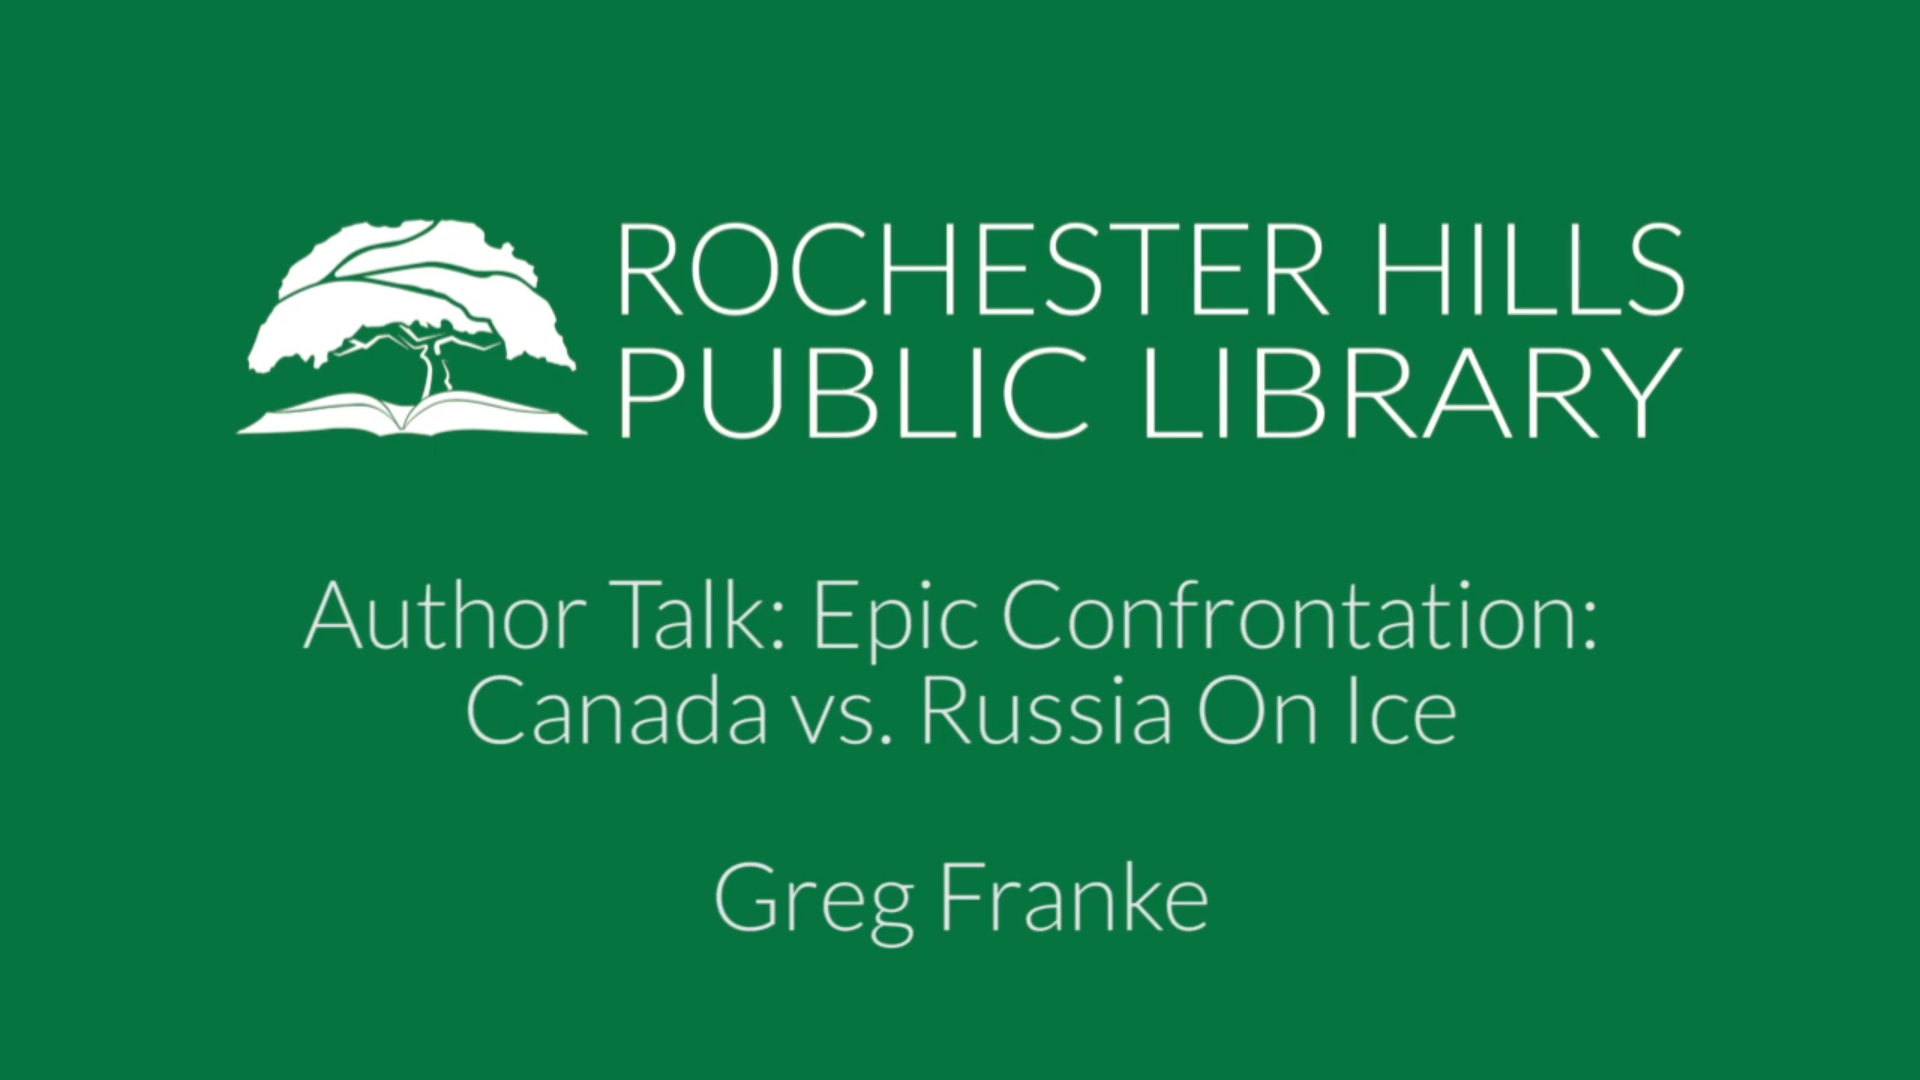 Author Talk: "Epic Confrontation: Canada vs. Russia On Ice" with Greg Franke